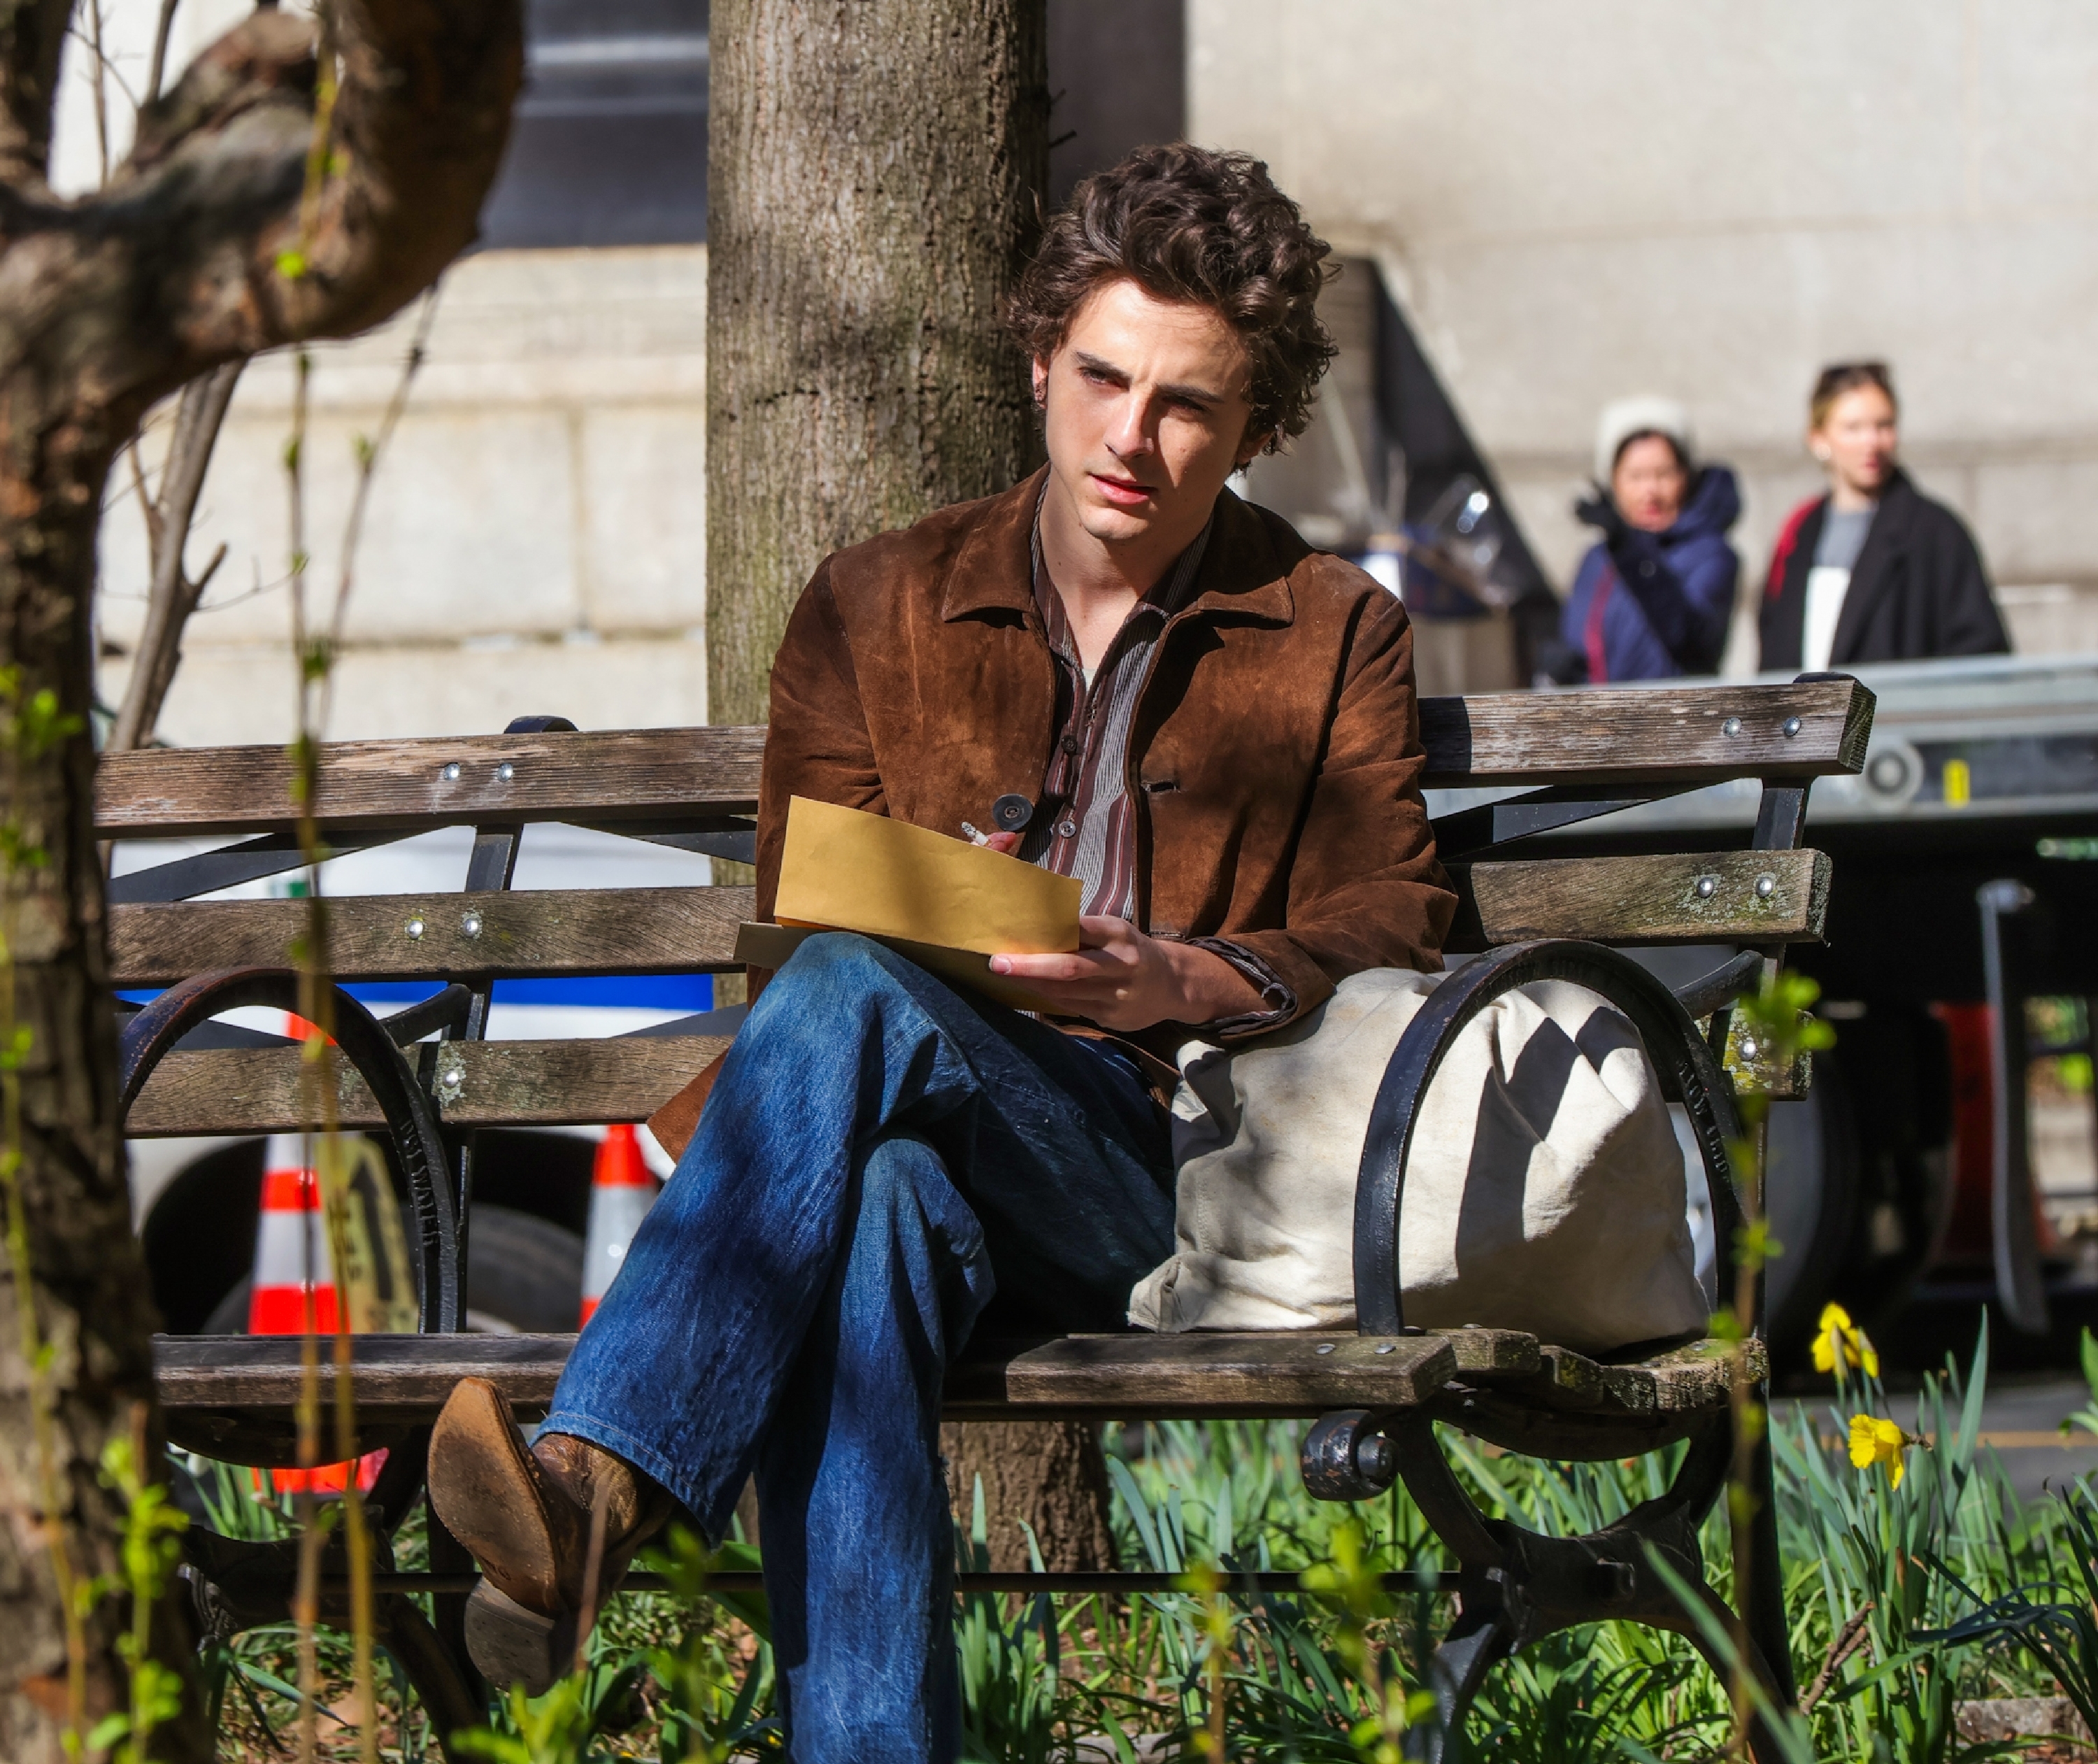 Timmy sitting on a bench with paper and pen, wearing a jacket and jeans, with trees and people in background